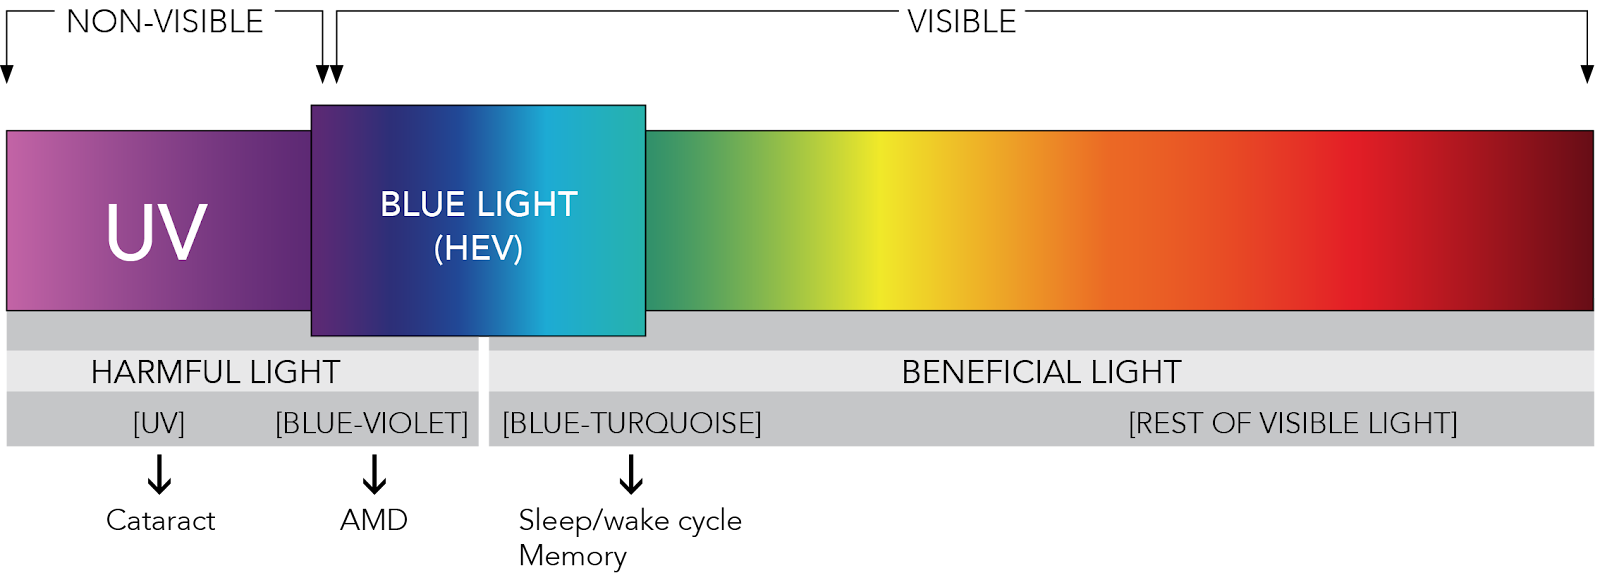 How Blue Light Accelerates Aging?